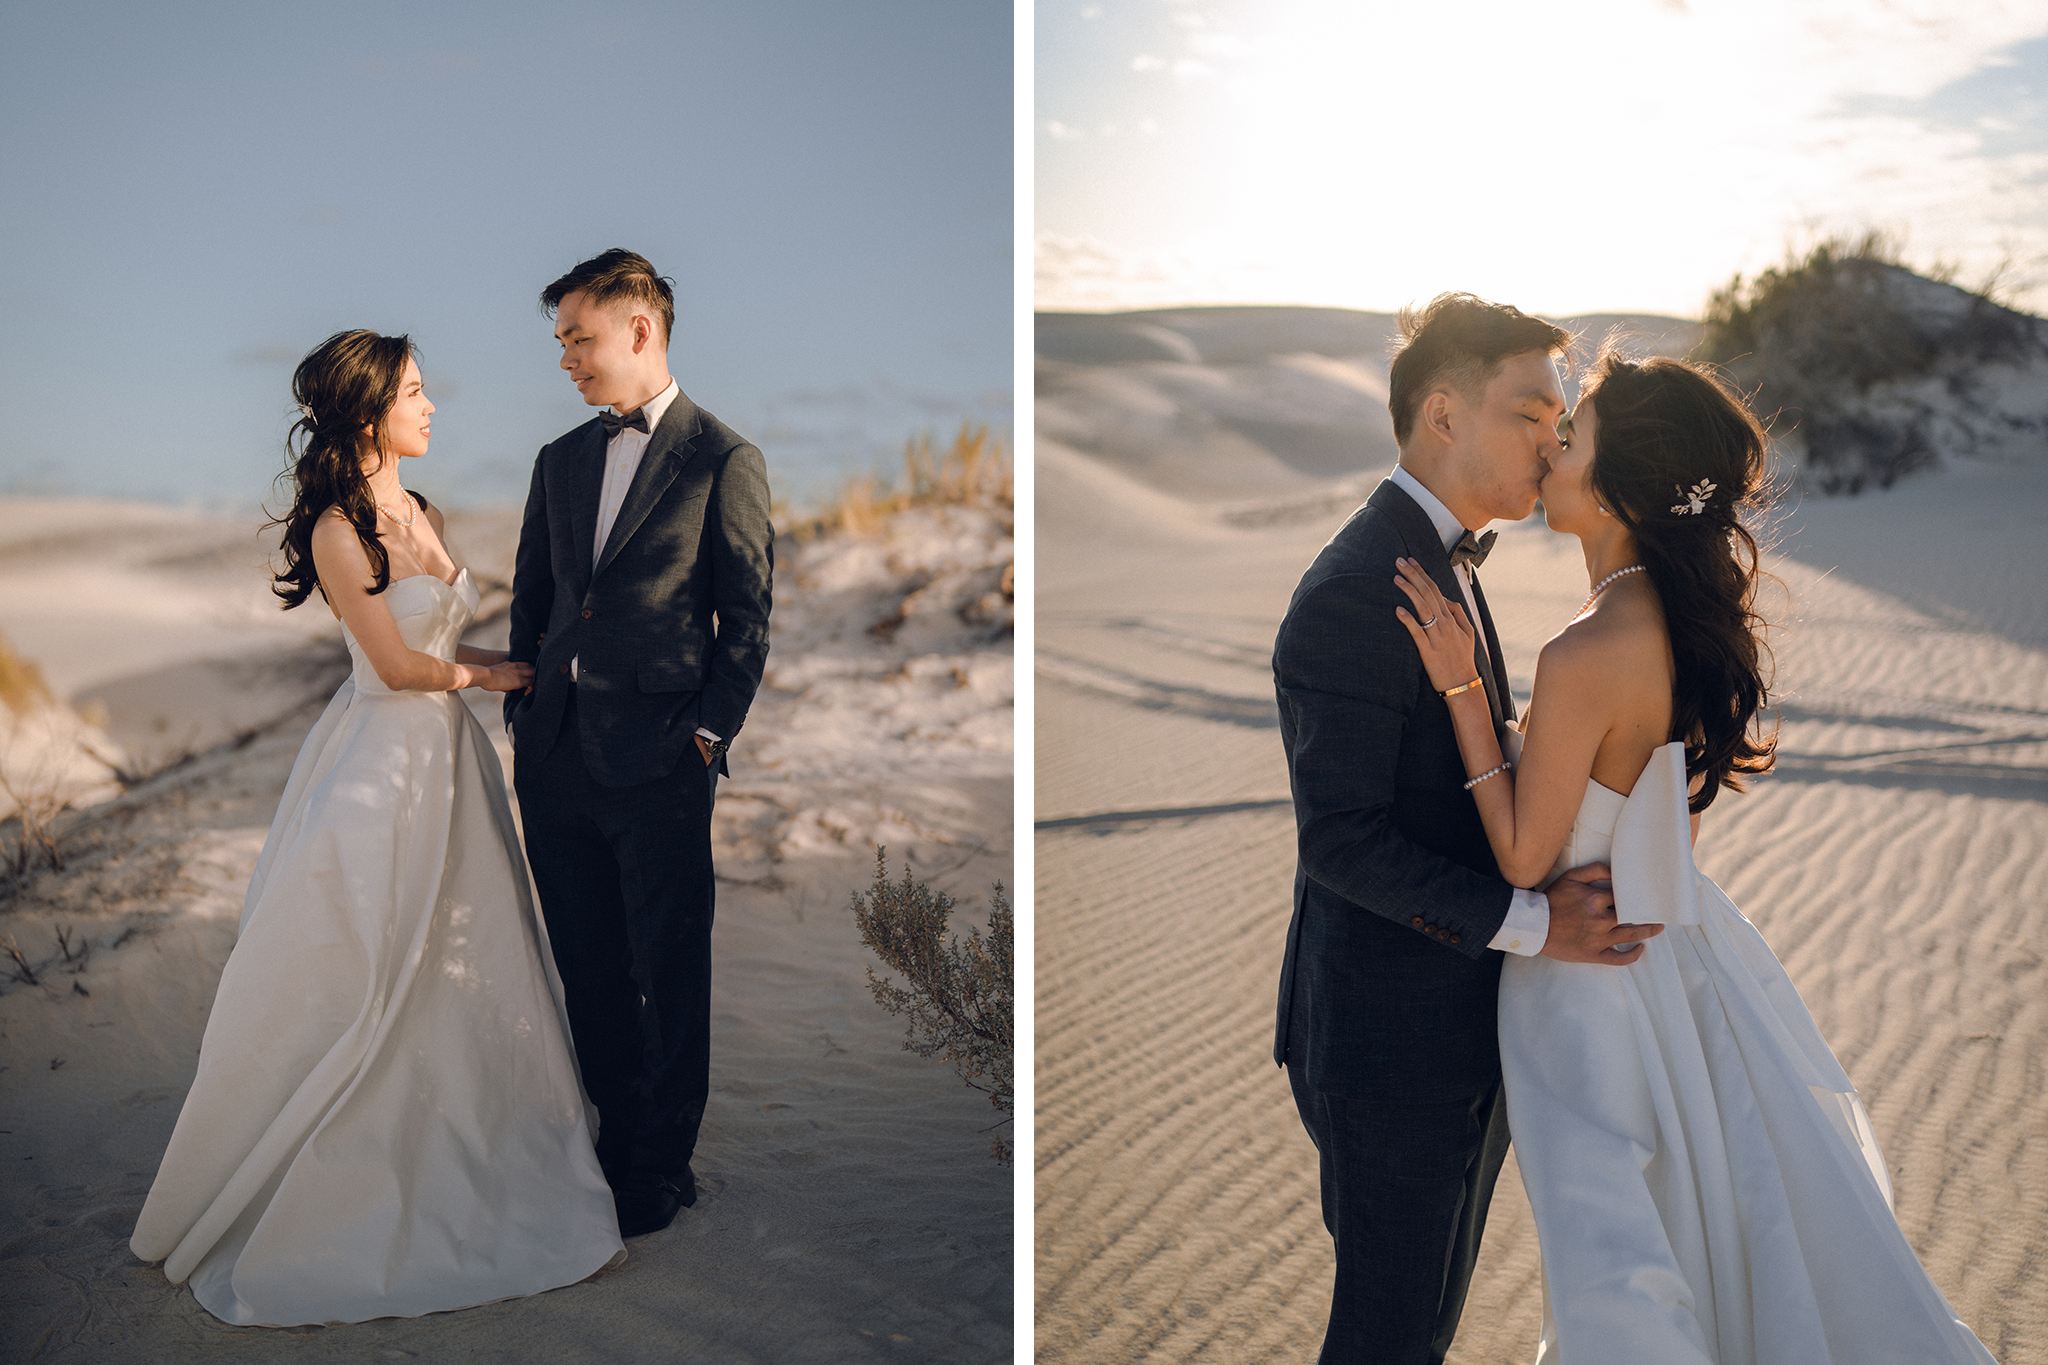 Perth Pre-Wedding Photoshoot at Lancelin Desert & Bells Lookout by Jimmy on OneThreeOneFour 28